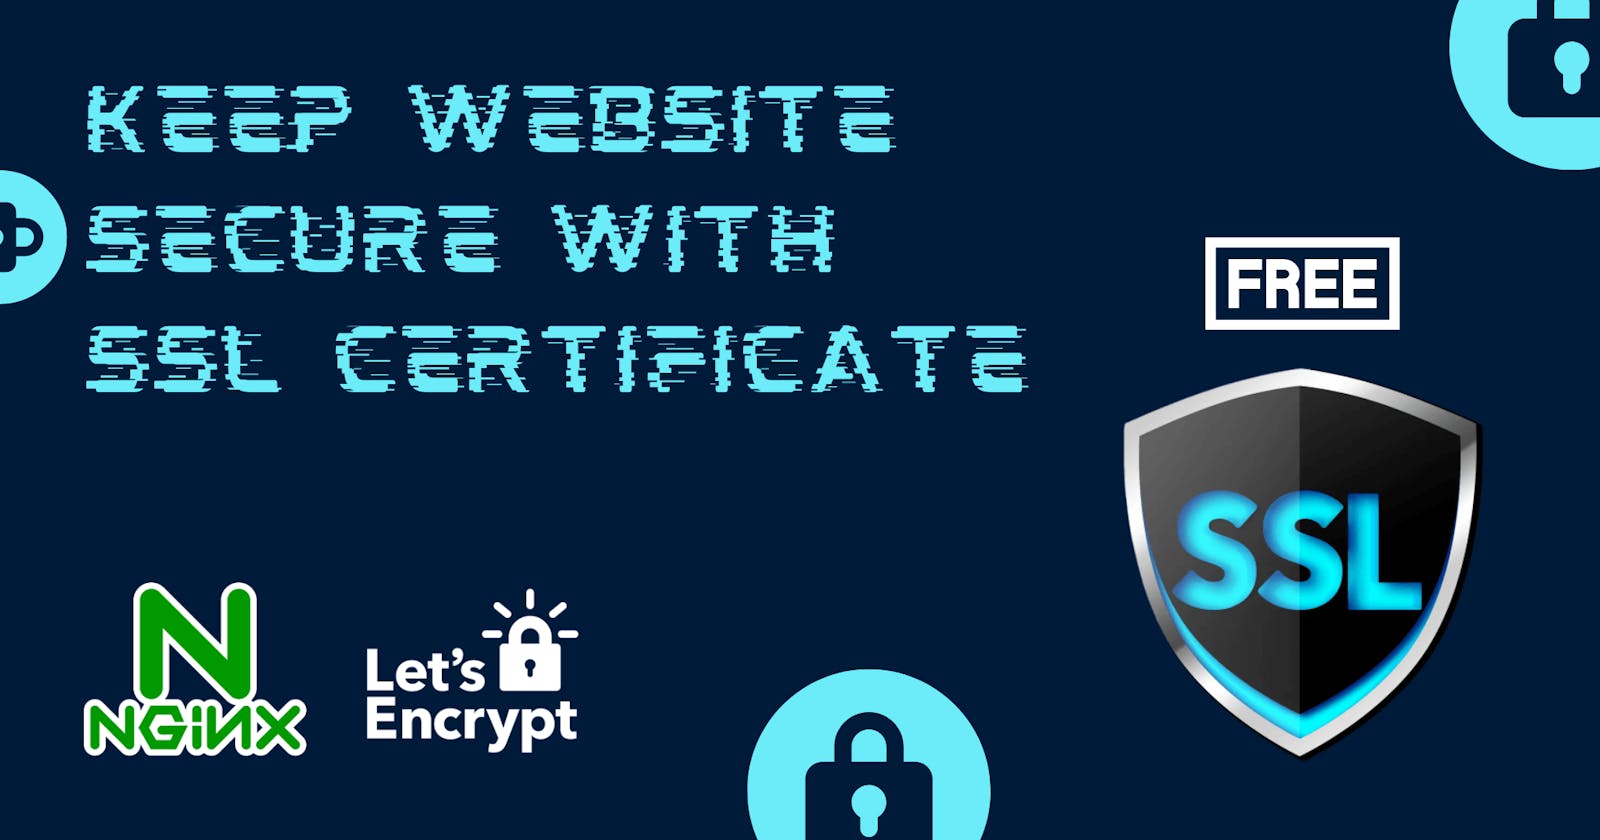 How to configure Free SSL Certificate on Nginx using Certbot